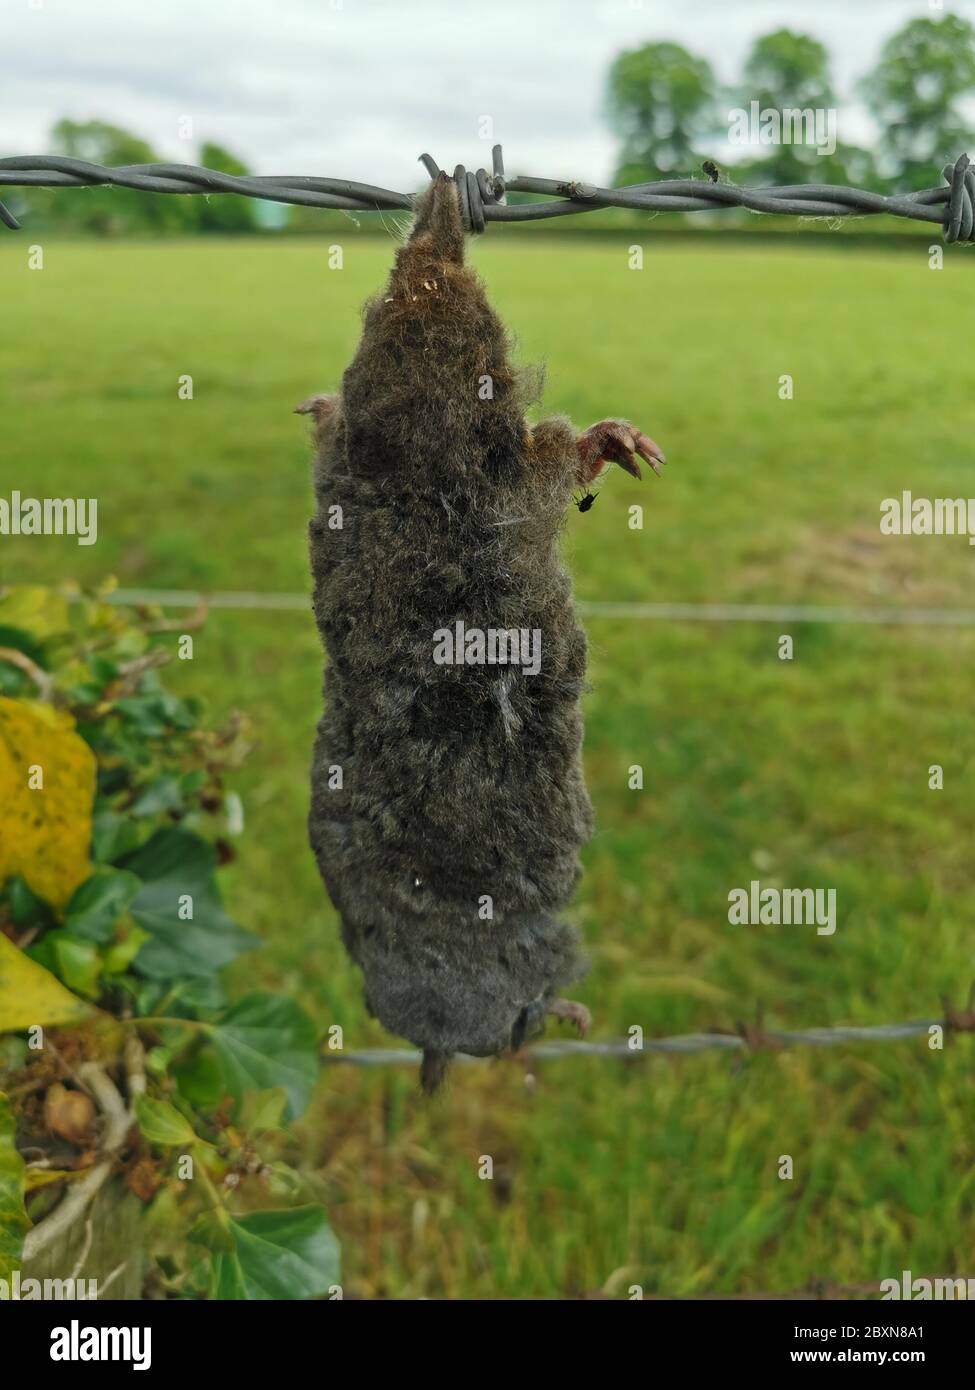 Dead mole hanging on fence to be counted fby land owner for payment to mole catcher, Cheshire, UK Stock Photo